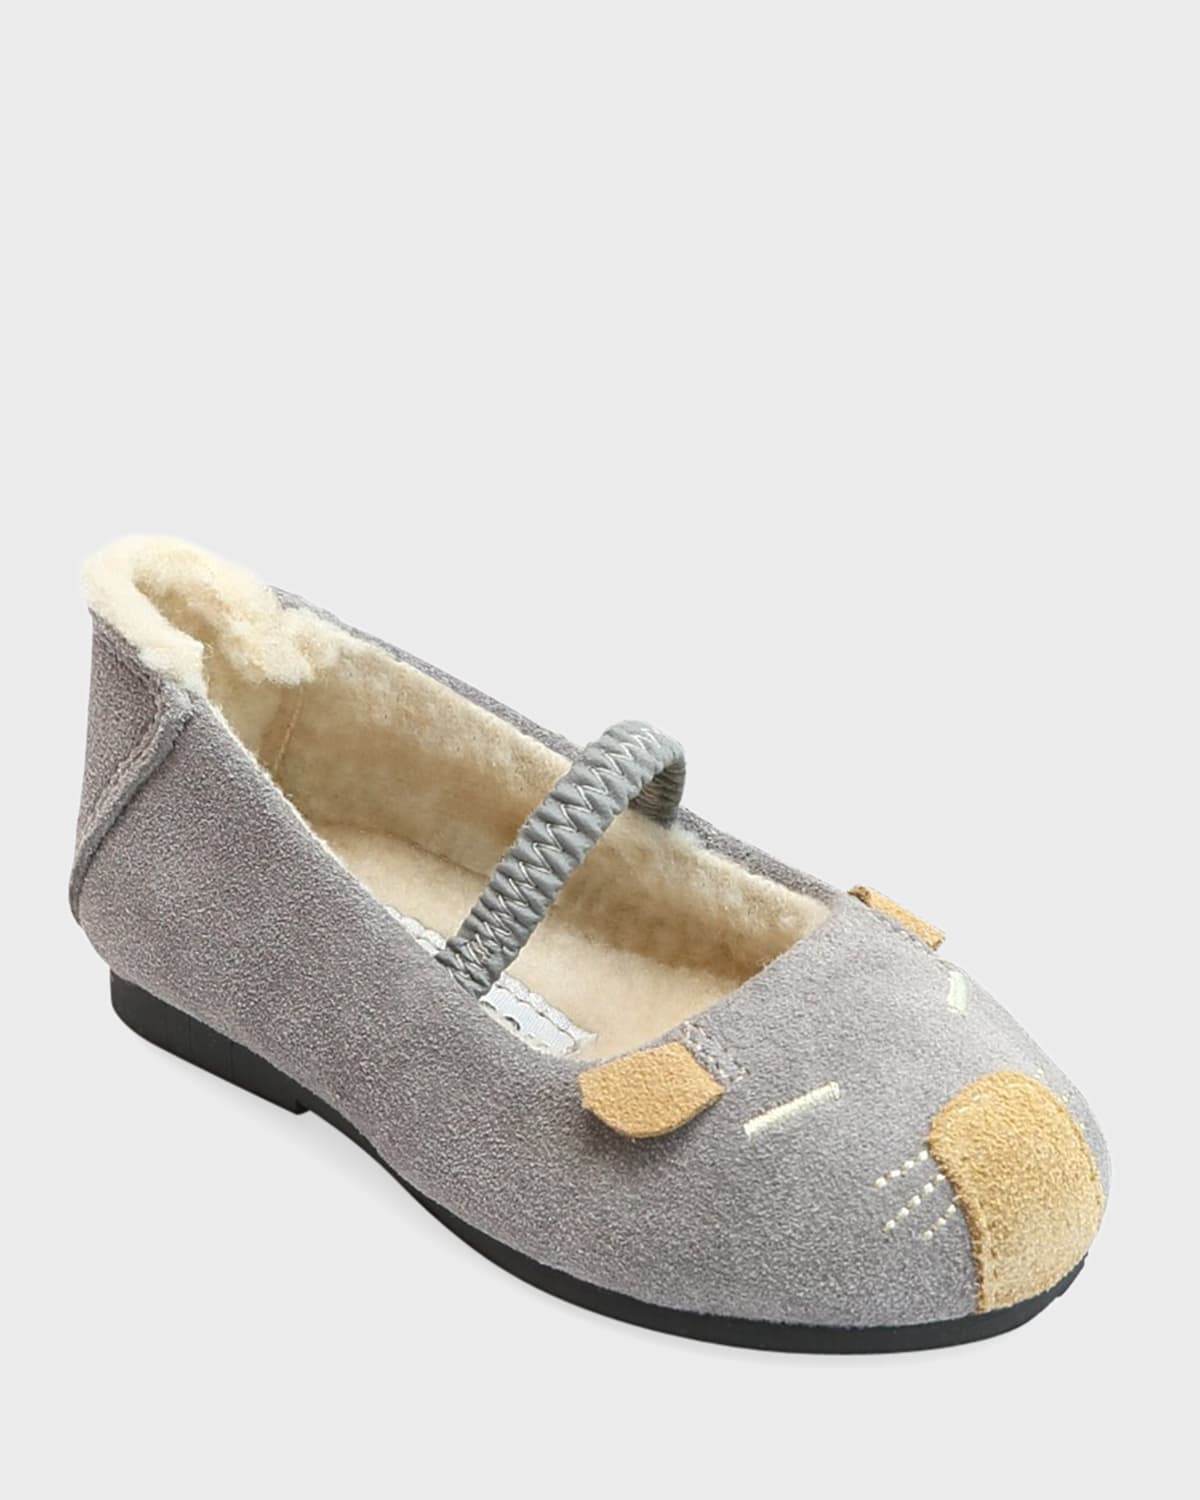 L'amour Shoes Mousie Embroidered Suede Flats, Baby/toddler/kids In Gray